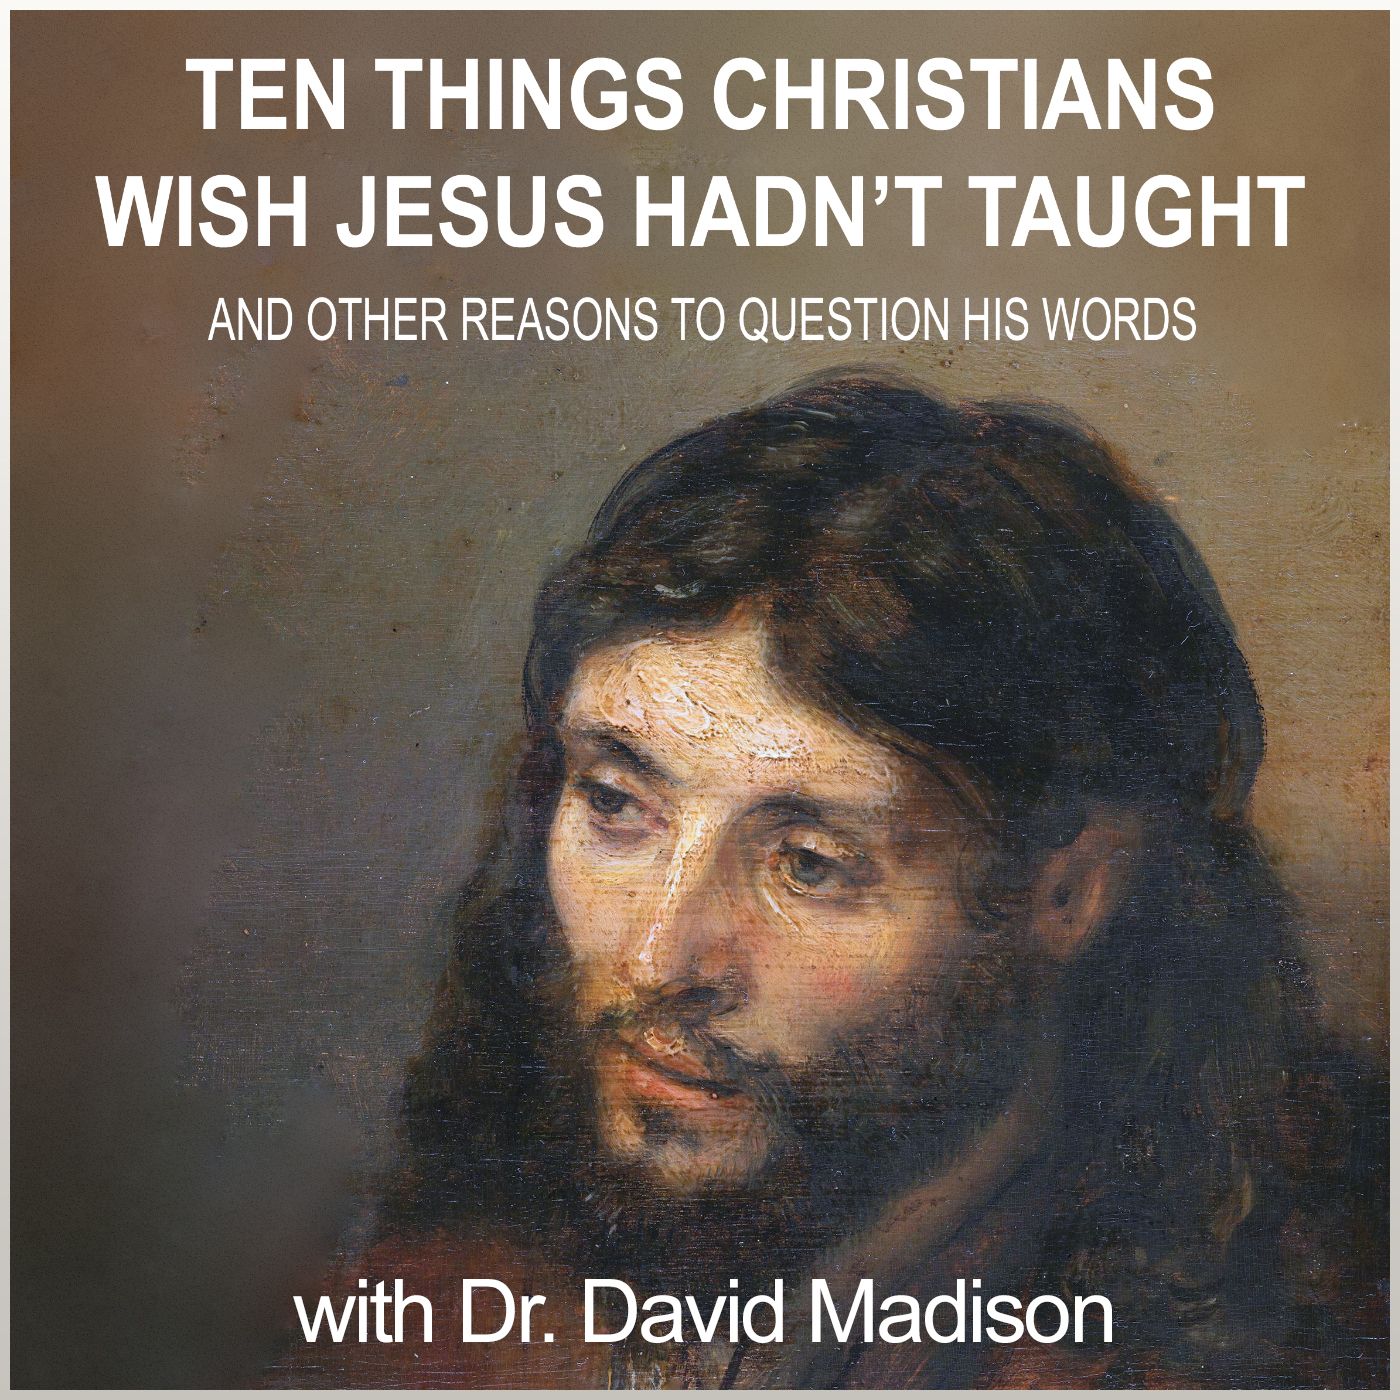 Ten Things Christians Wish Jesus Hadn’t Taught (with author Dr. David Madison)